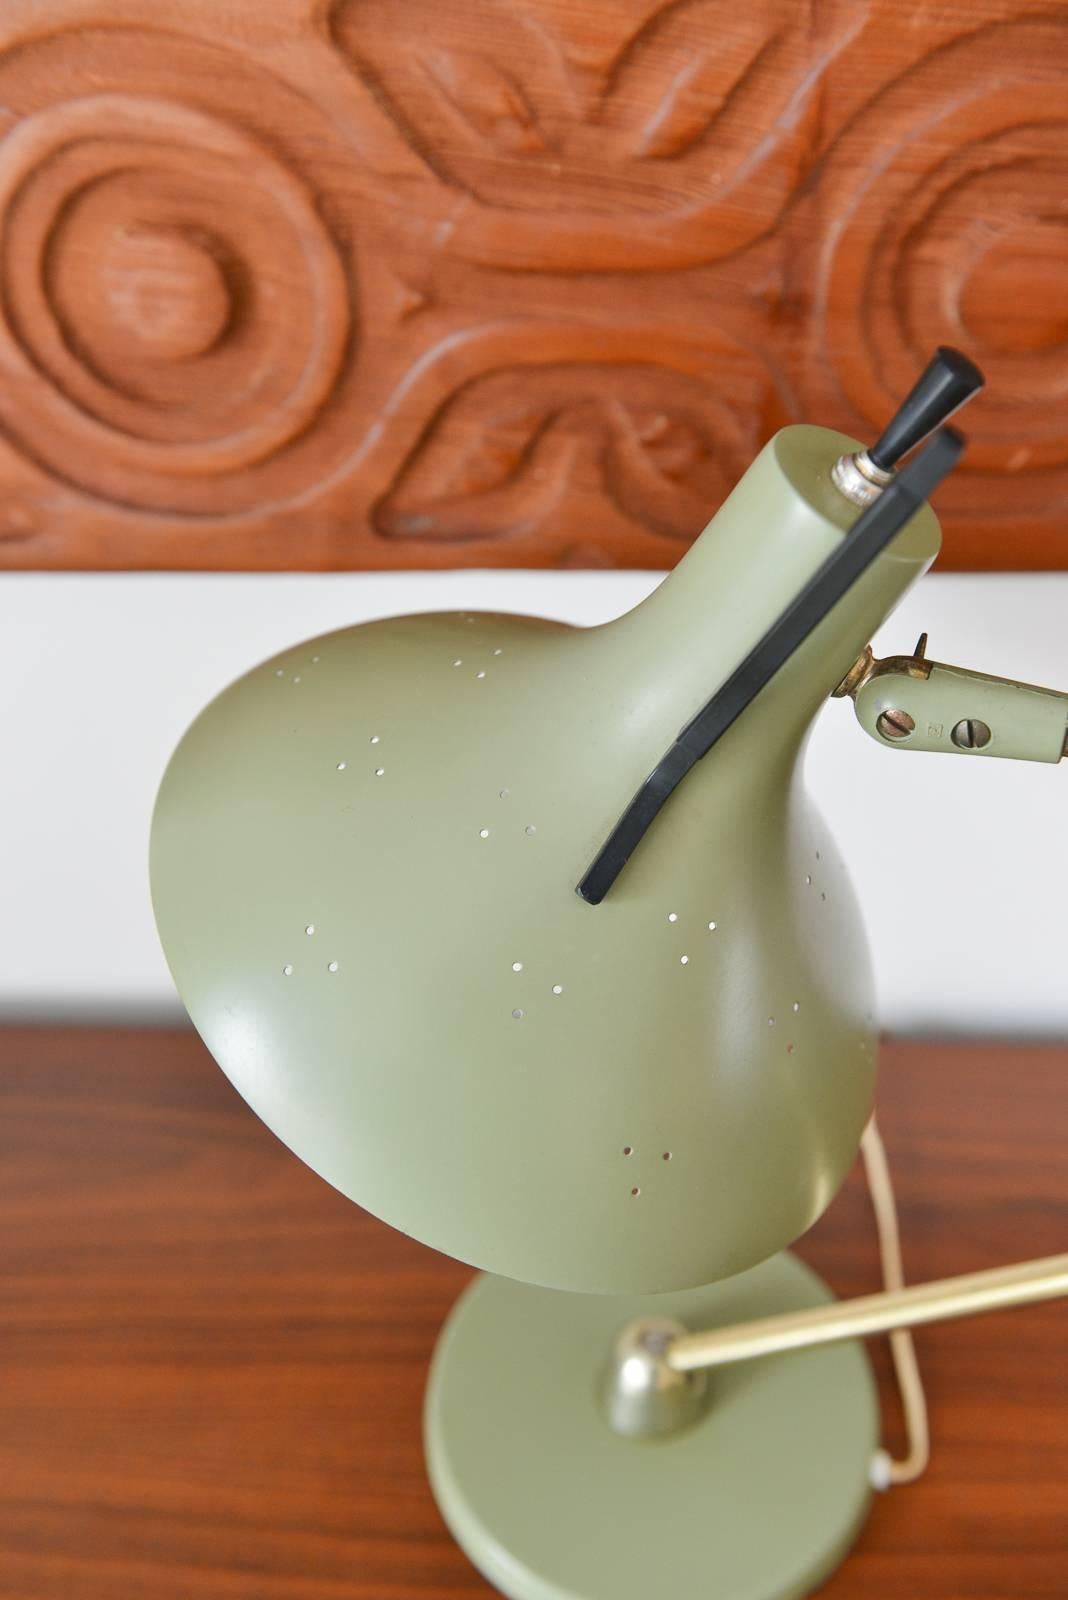 American Enameled Desk Lamp by Maurizio Tempestino for Lightolier